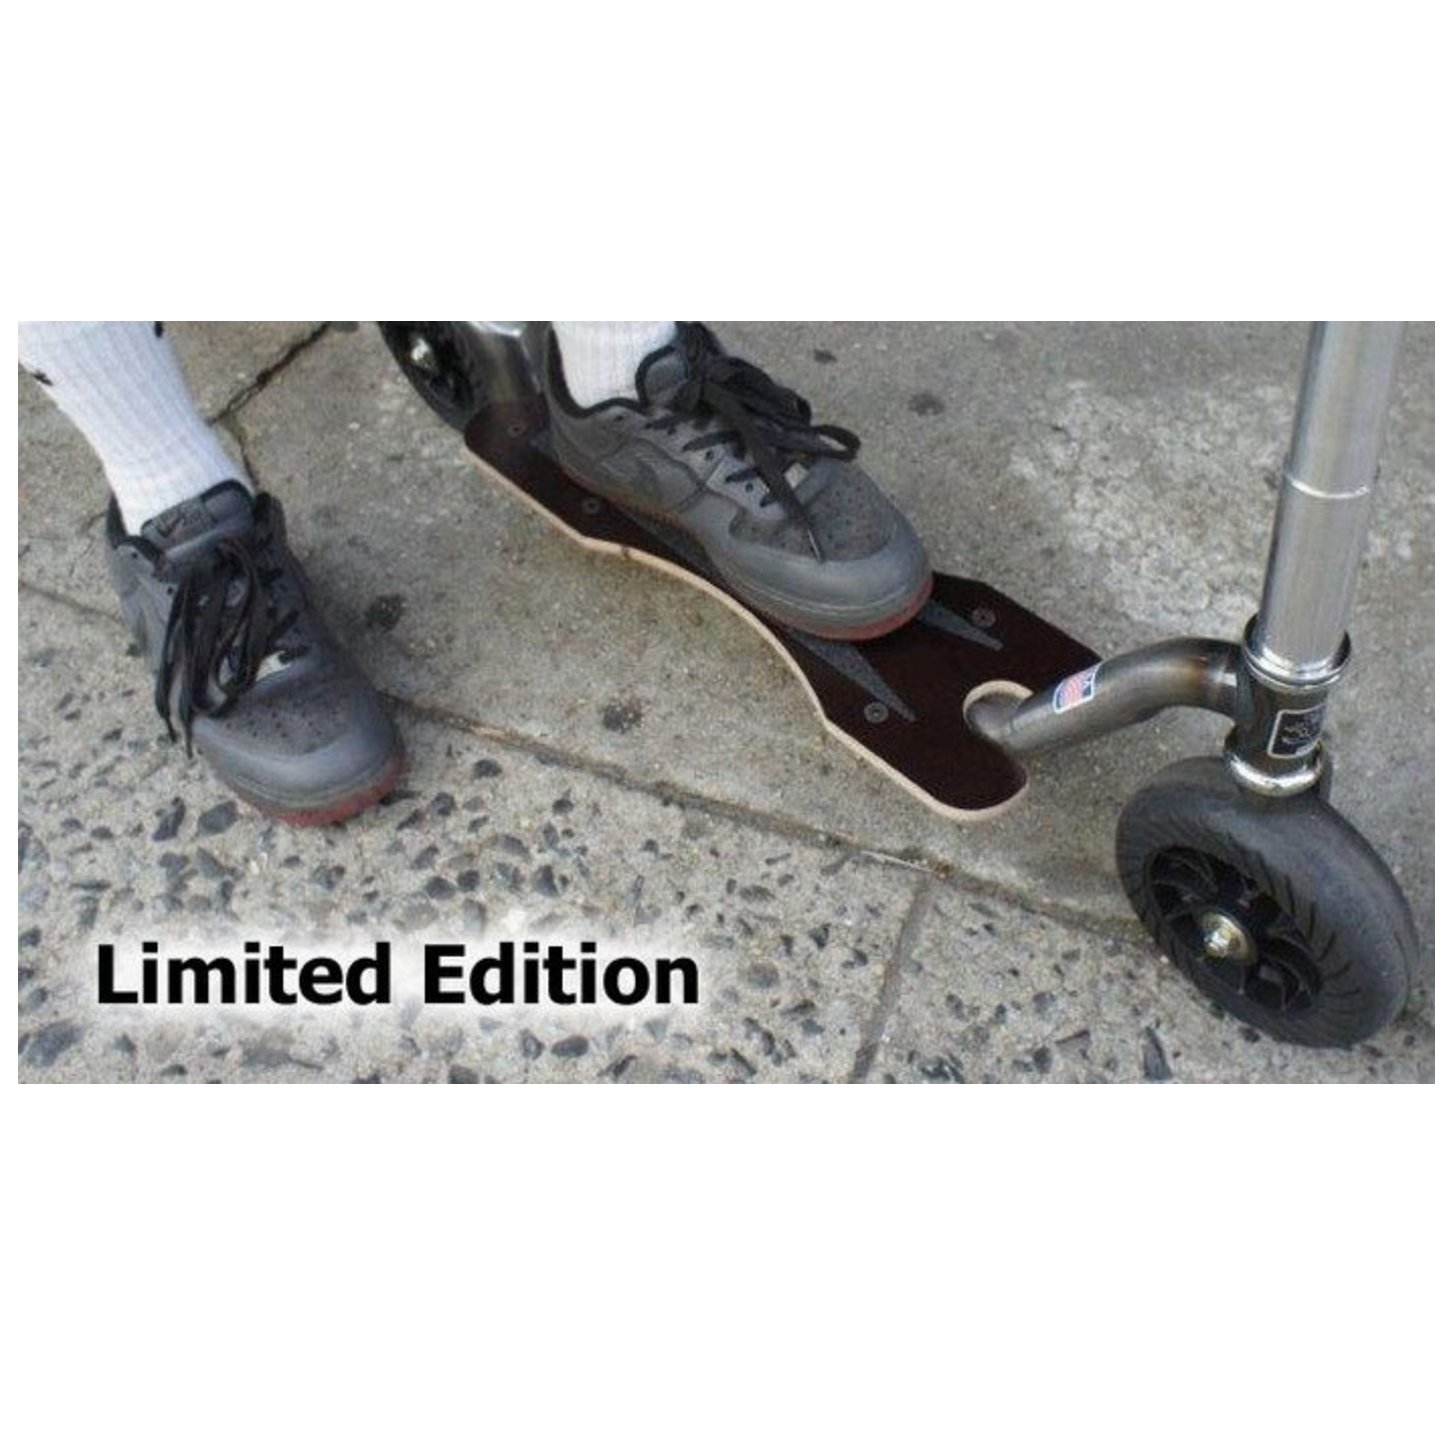 KickPed adult kick scooter - The Indestructible !